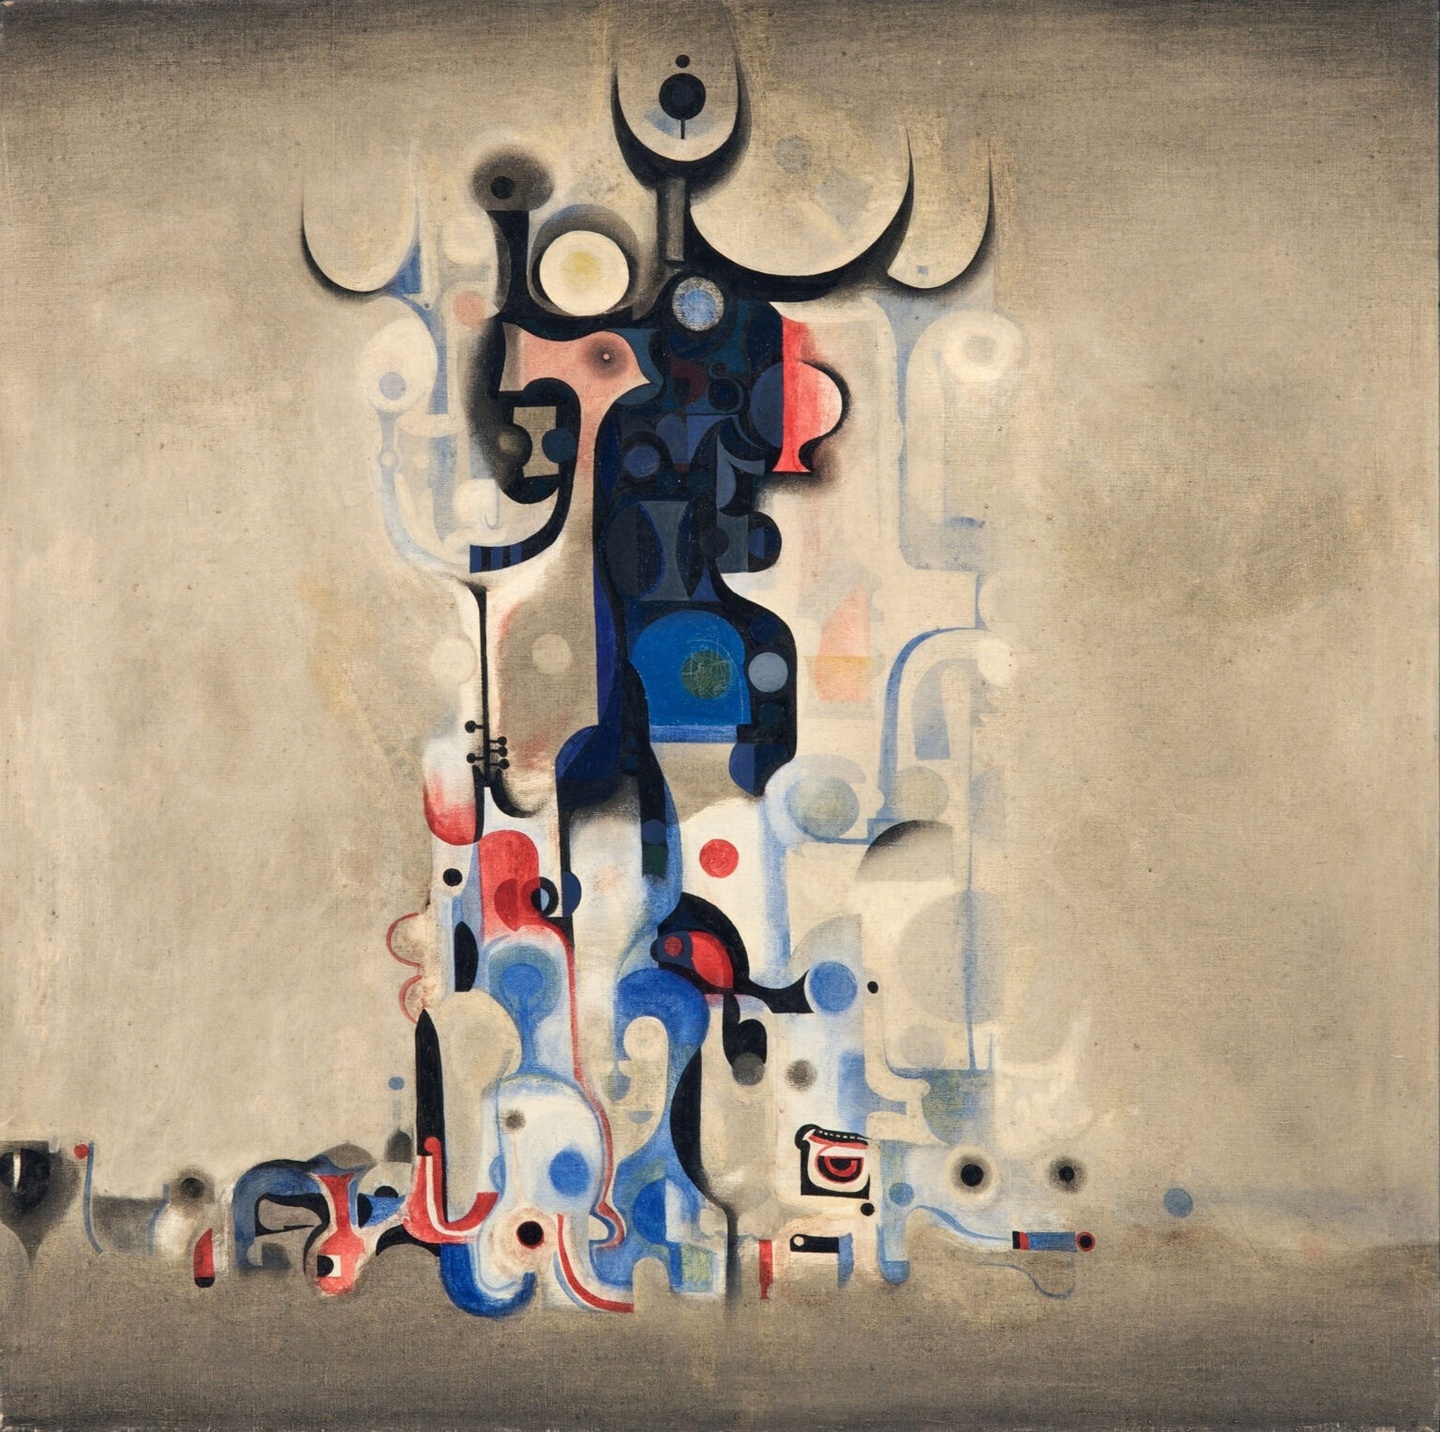 Ibrahim El-Salahi, “Vision of the Tomb,” 1965. Oil on canvas, 36 x 36 inches. Collection of The Africa Center, New York. © Ibrahim El-Salahi. All rights reserved, Artists Rights Society, New York. Courtesy Vigo Gallery and American Federation of Arts. (Photo: Jerry L. Thompson)